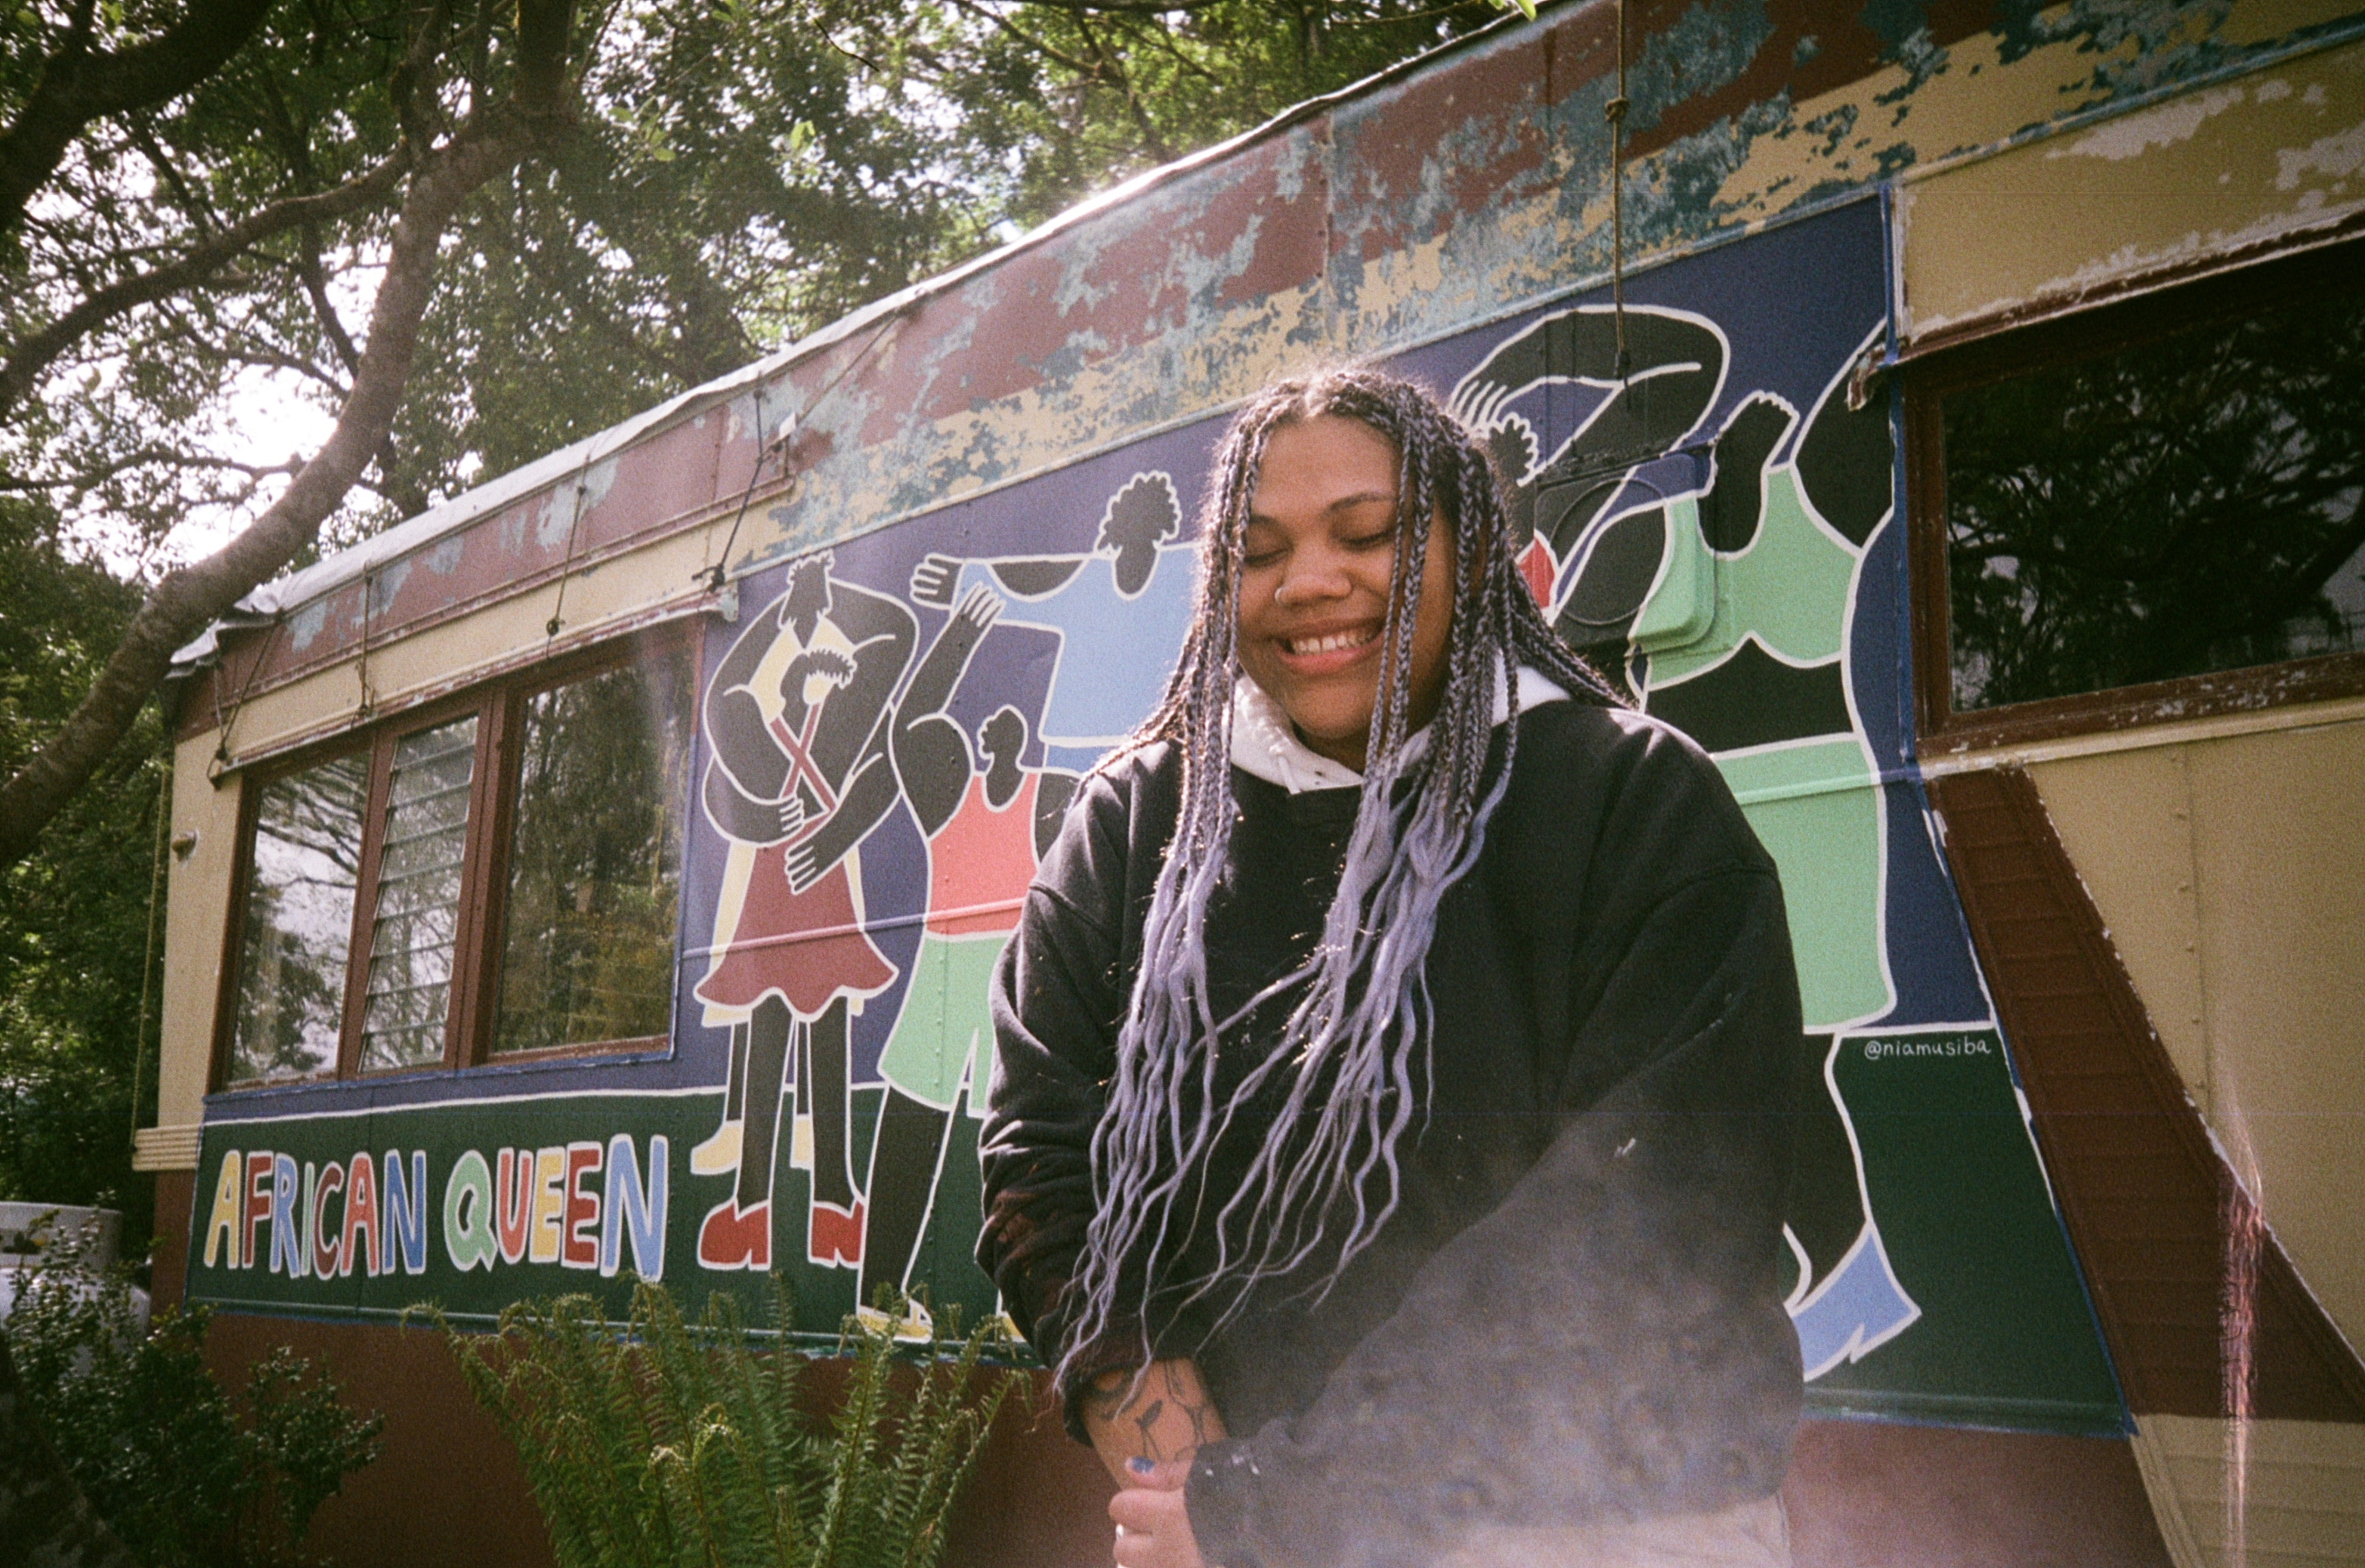 Artist Nia Musiba standing outside, in front of a mural with figures dancing and hugging. Text on the mural reads, “African Queen” and the mural itself is nestled in some trees. Nia is wearing a black hoodie and is sporting purple braids. Her eyes are closed and her smile is beaming.